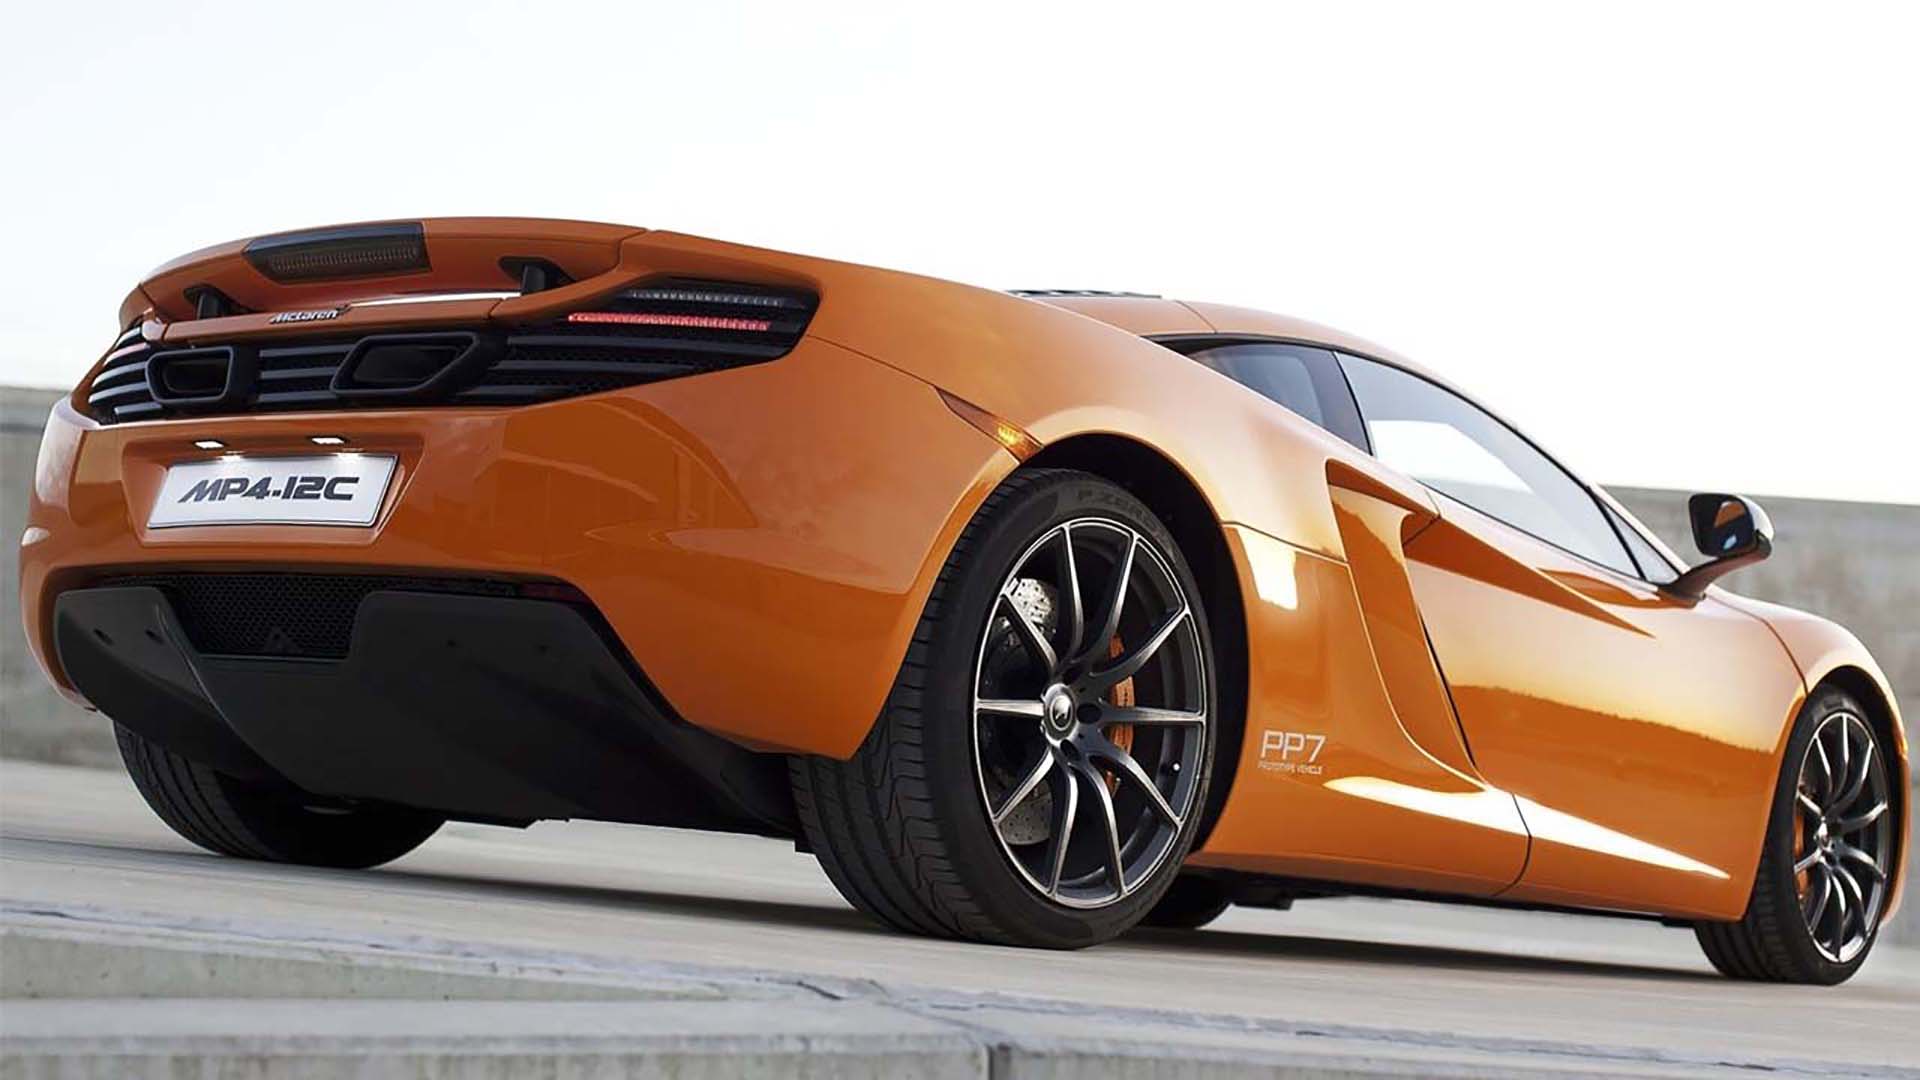 Mclaren MP4-12C Body Design & Engineering by ADP Special Projects